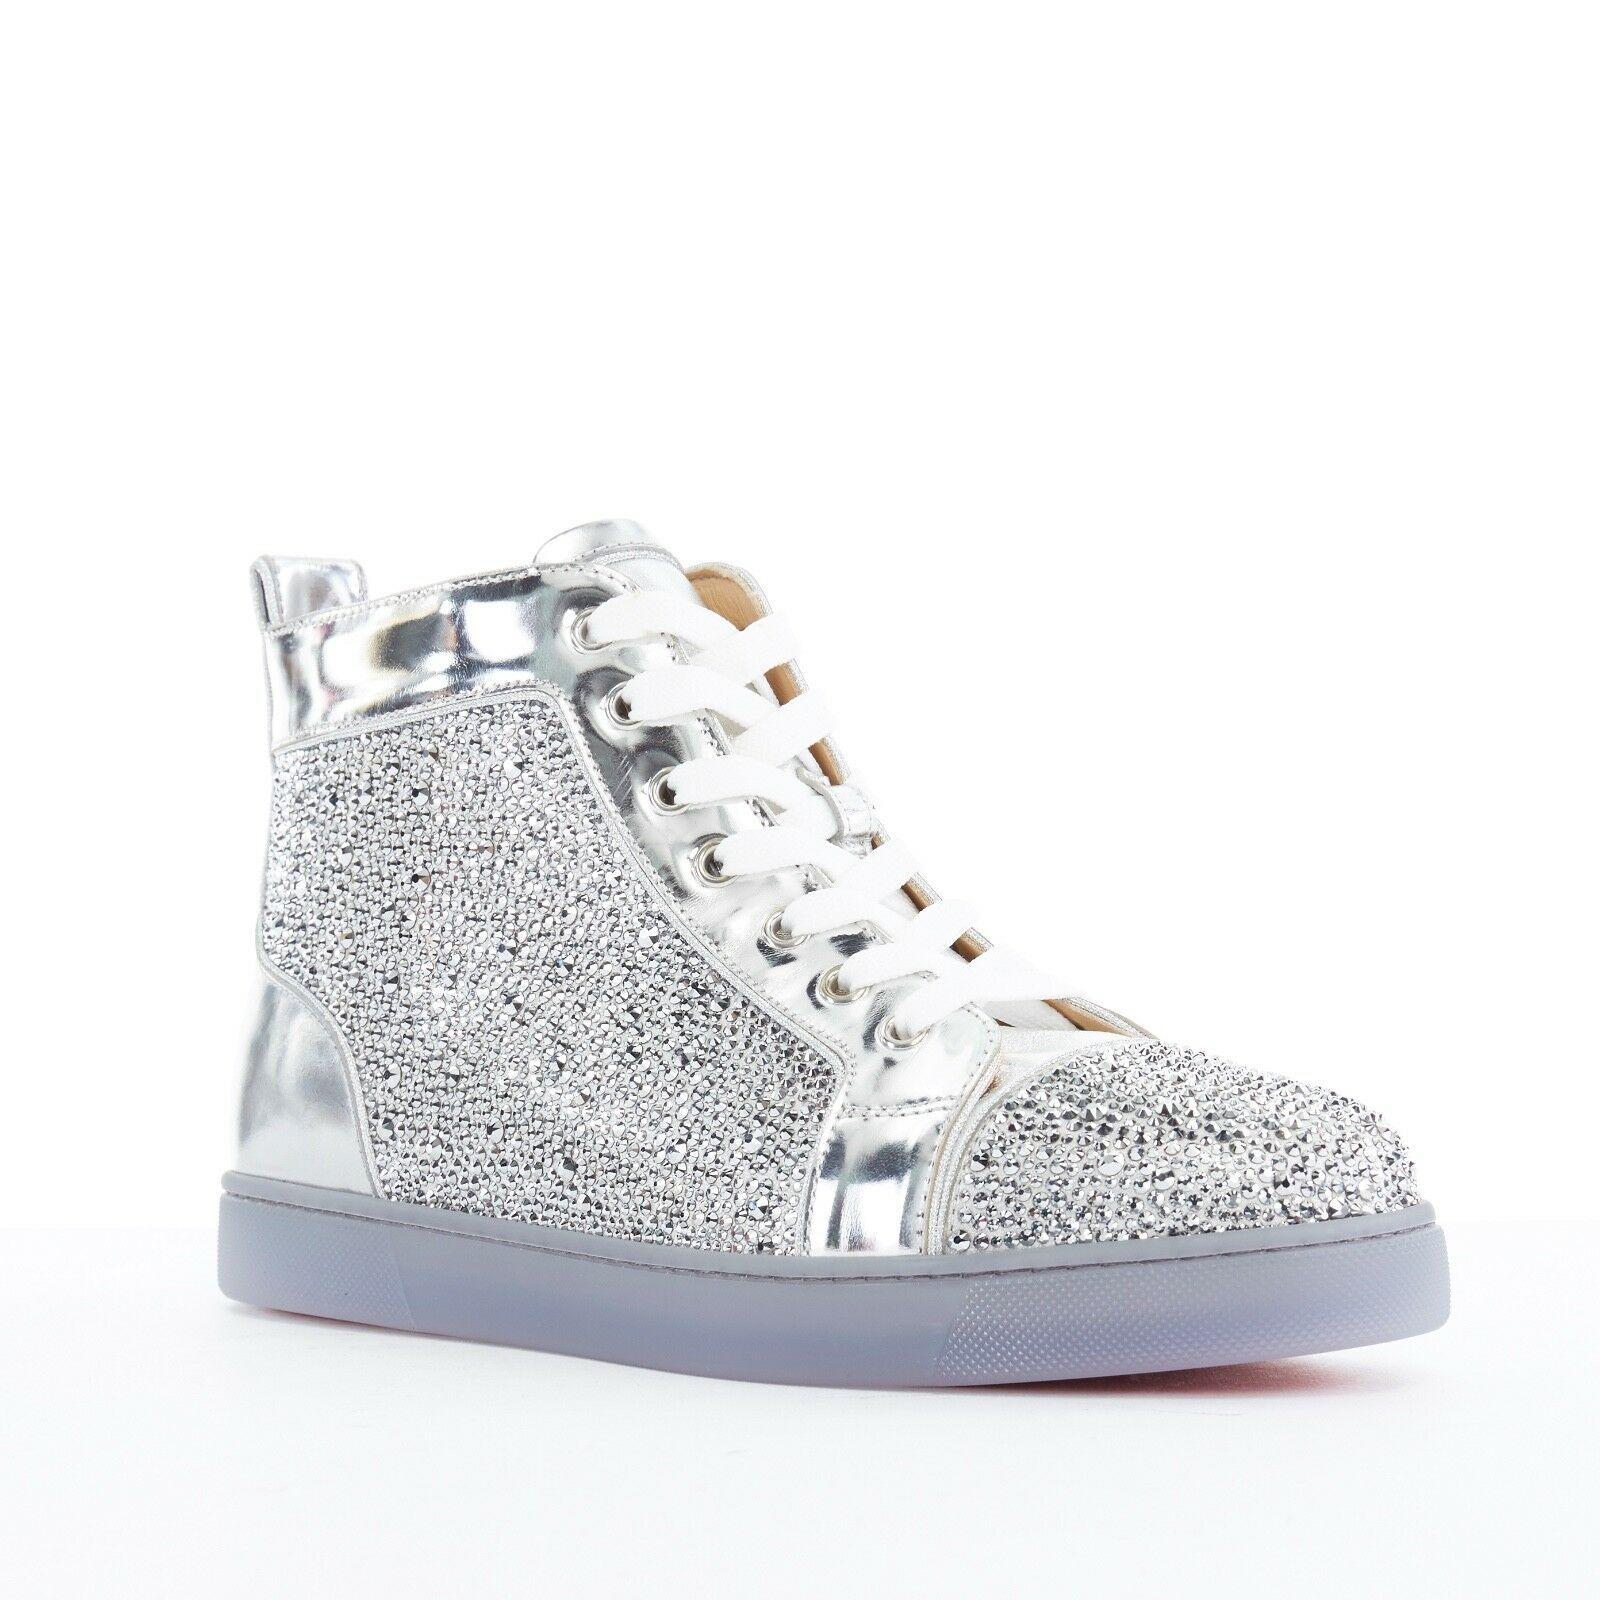 new CHRISTIAN LOUBOUTIN Louis Flat Strass crystal mirror silver sneaker EU39.5
CHRISTIAN LOUBOUTIN
Louis Flat Strass. 
Mirrored silver leather upper. 
Silver Strass crystal all-over embellished in various sizes. 
Light grey woven lace up front.